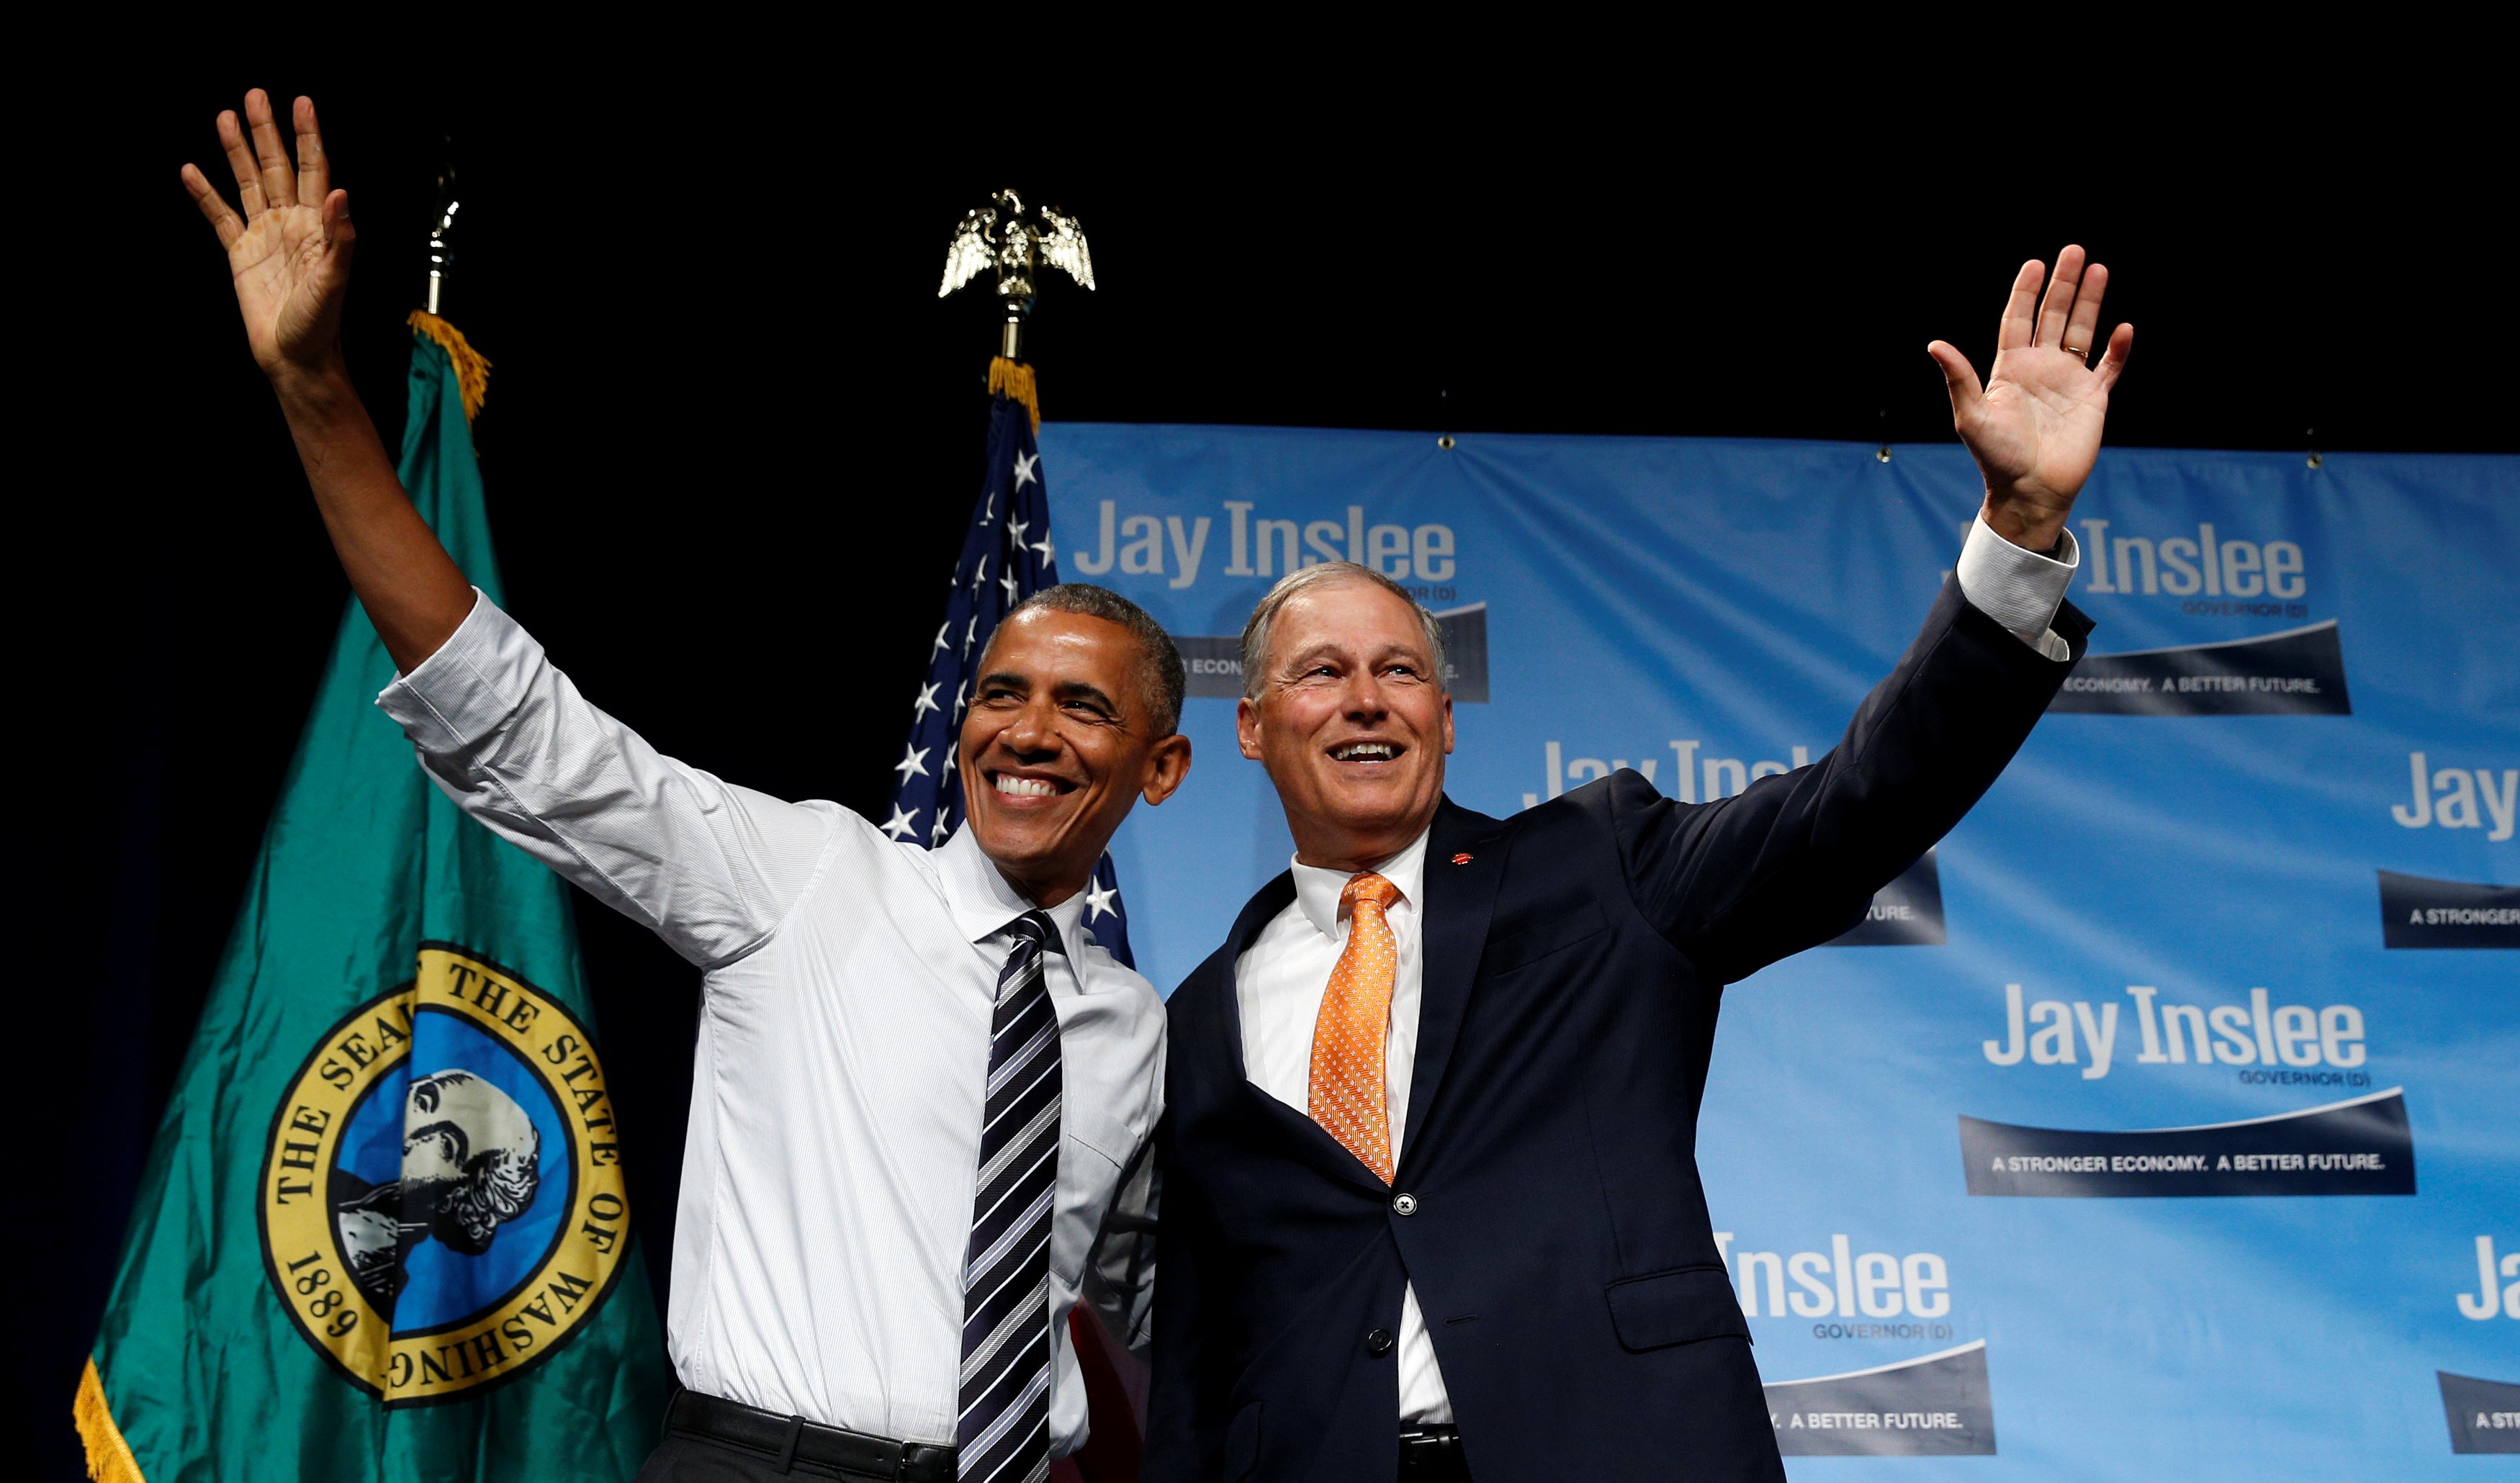 U.S. President Barack Obama waves as he arrives to speak at a fundraiser for Washington Governor Jay Inslee in Seattle